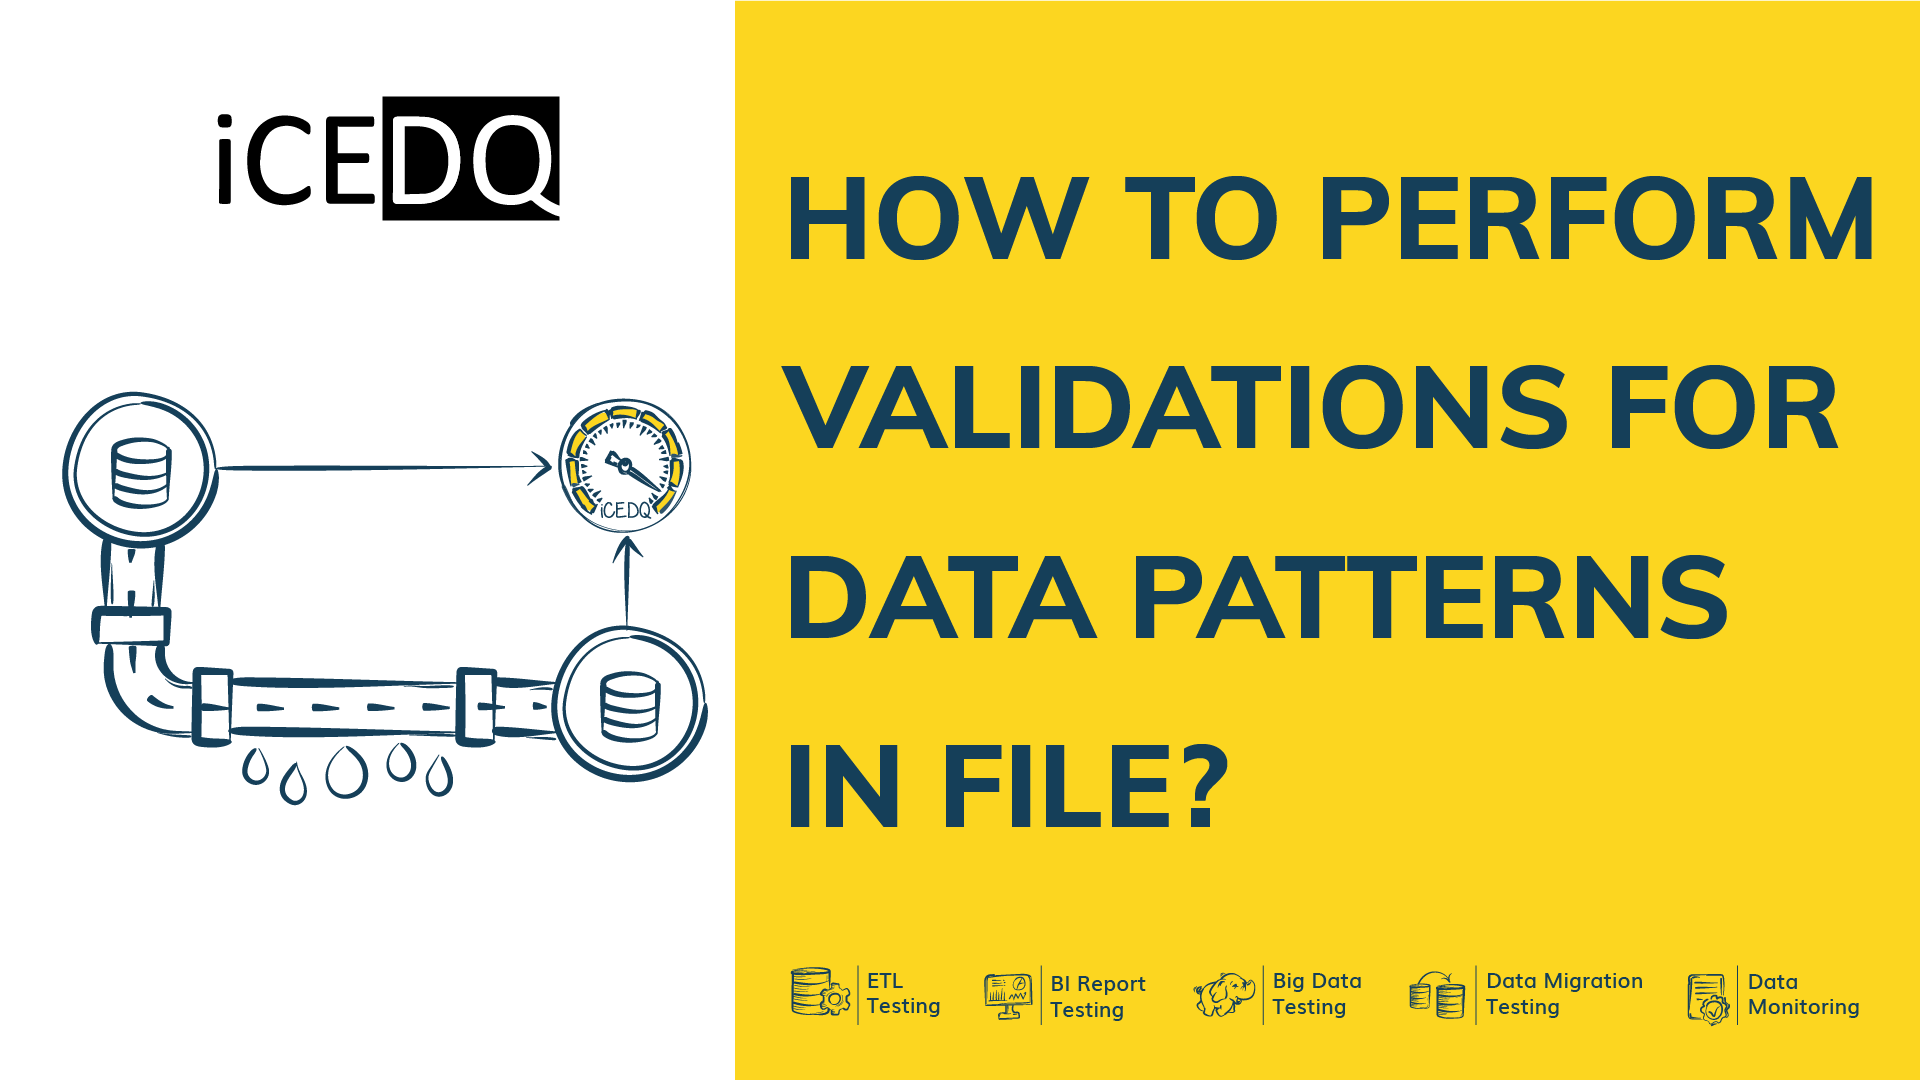 How to Perform Validations for Data Patterns in File?